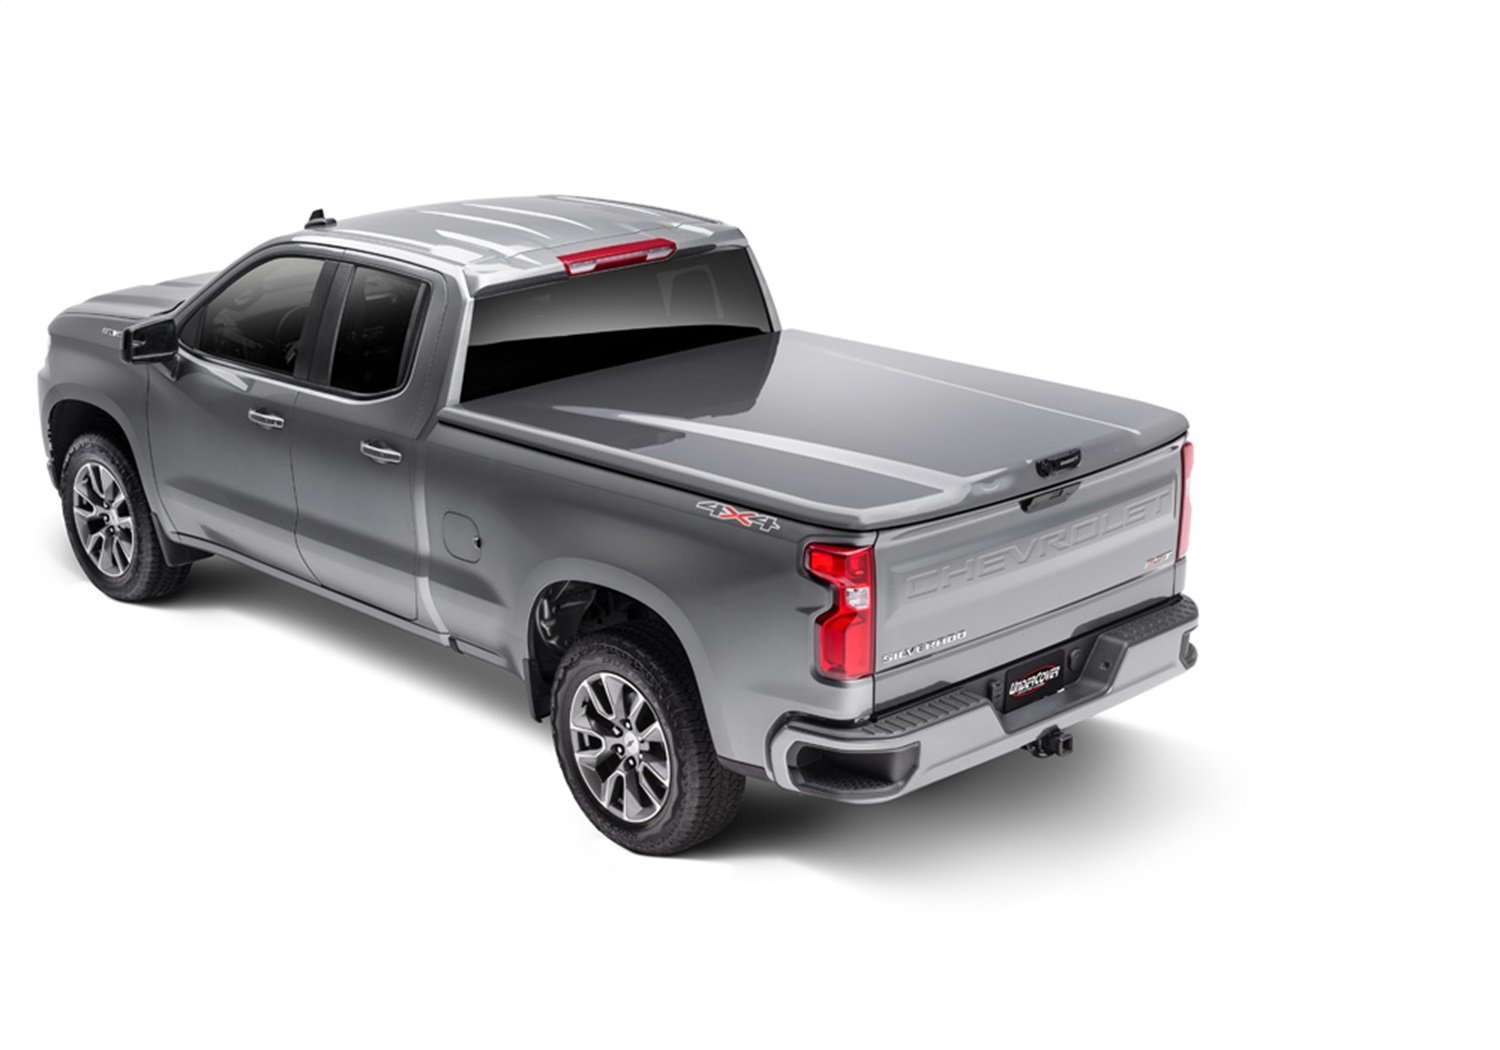 UC1238 Elite Hard Non-Folding Cover, Select GMC Sierra (w/o CarbonPro Bed) 5'9" Bed w/ MultiPro Tailgate, Black Textured